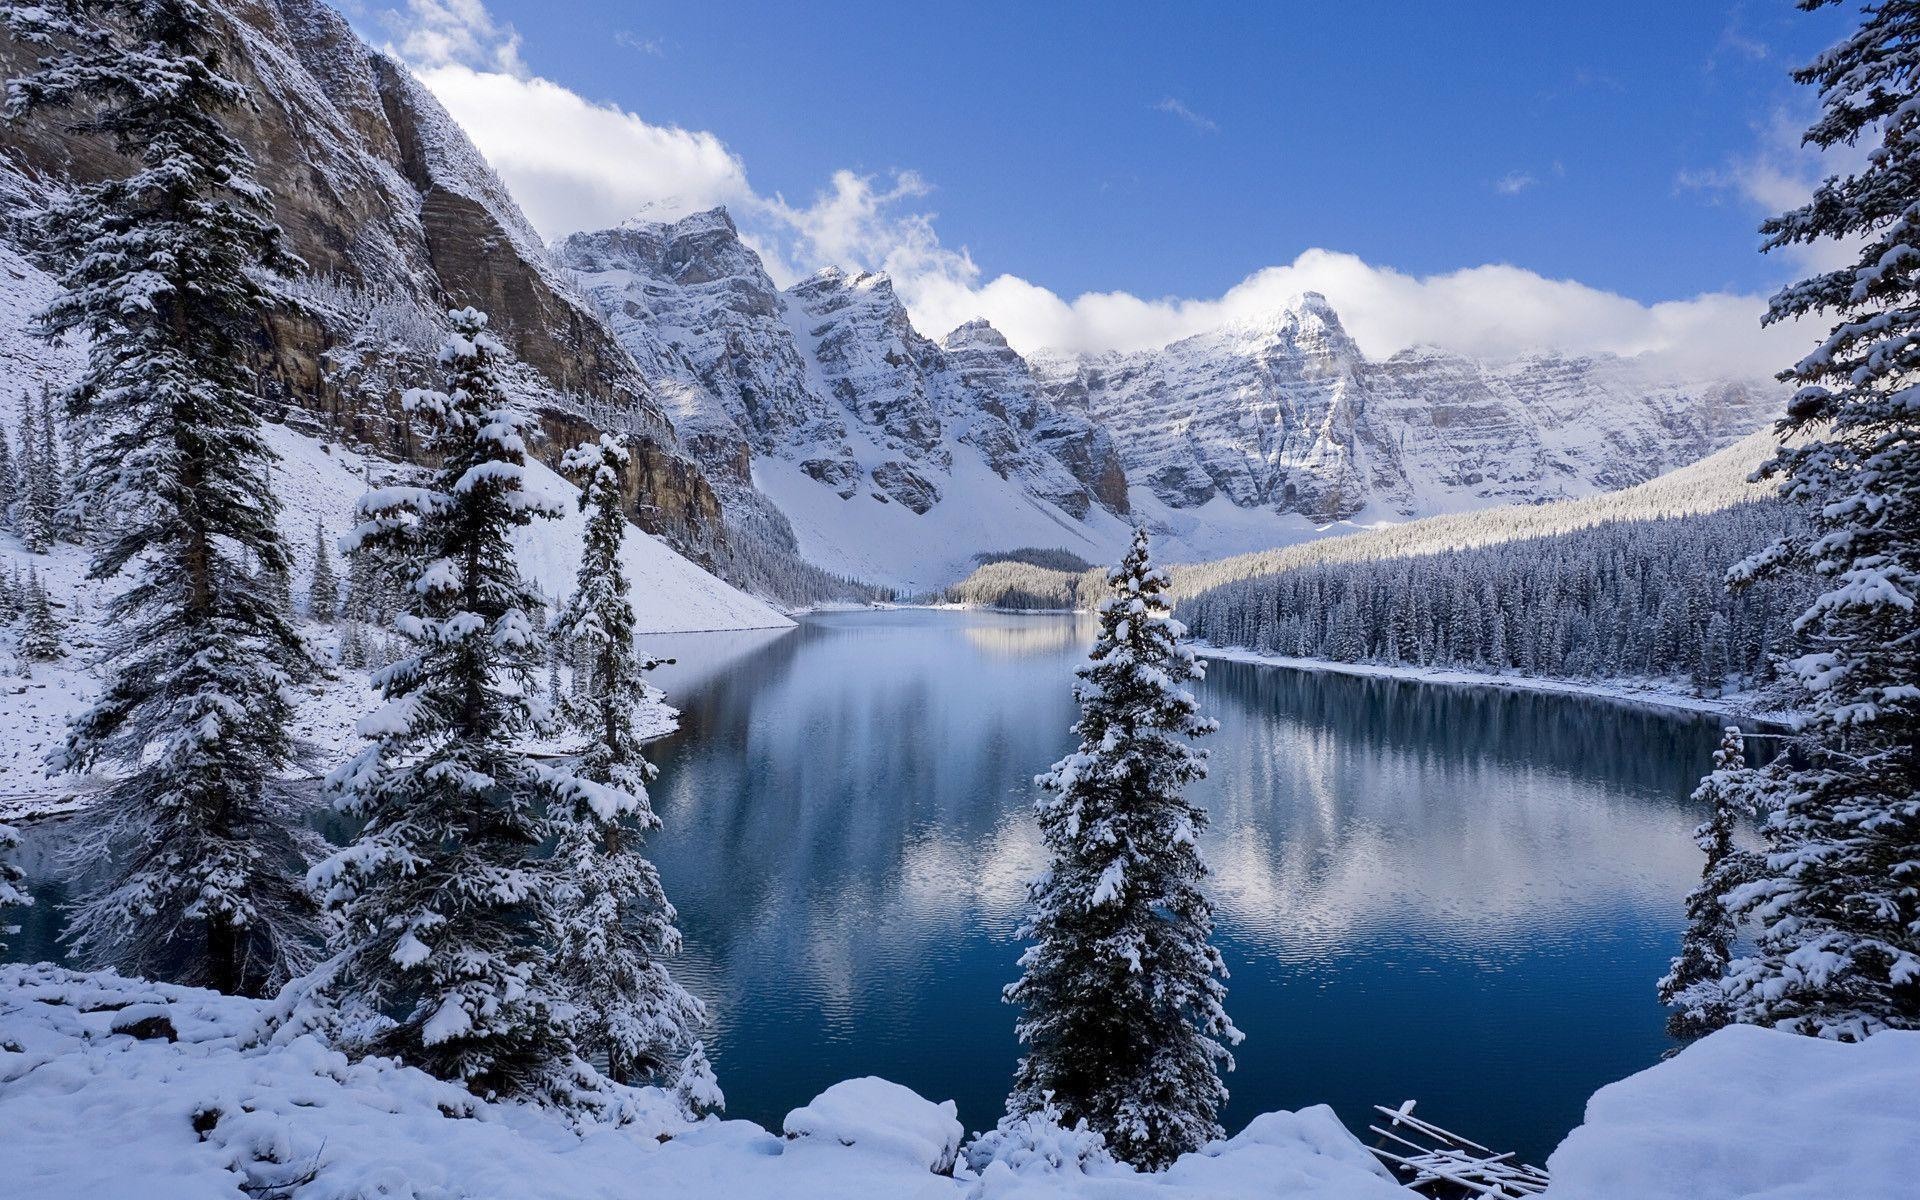 Wooden Cabins In The Snowy Mountains Wallpaper - Moraine Lake - HD Wallpaper 